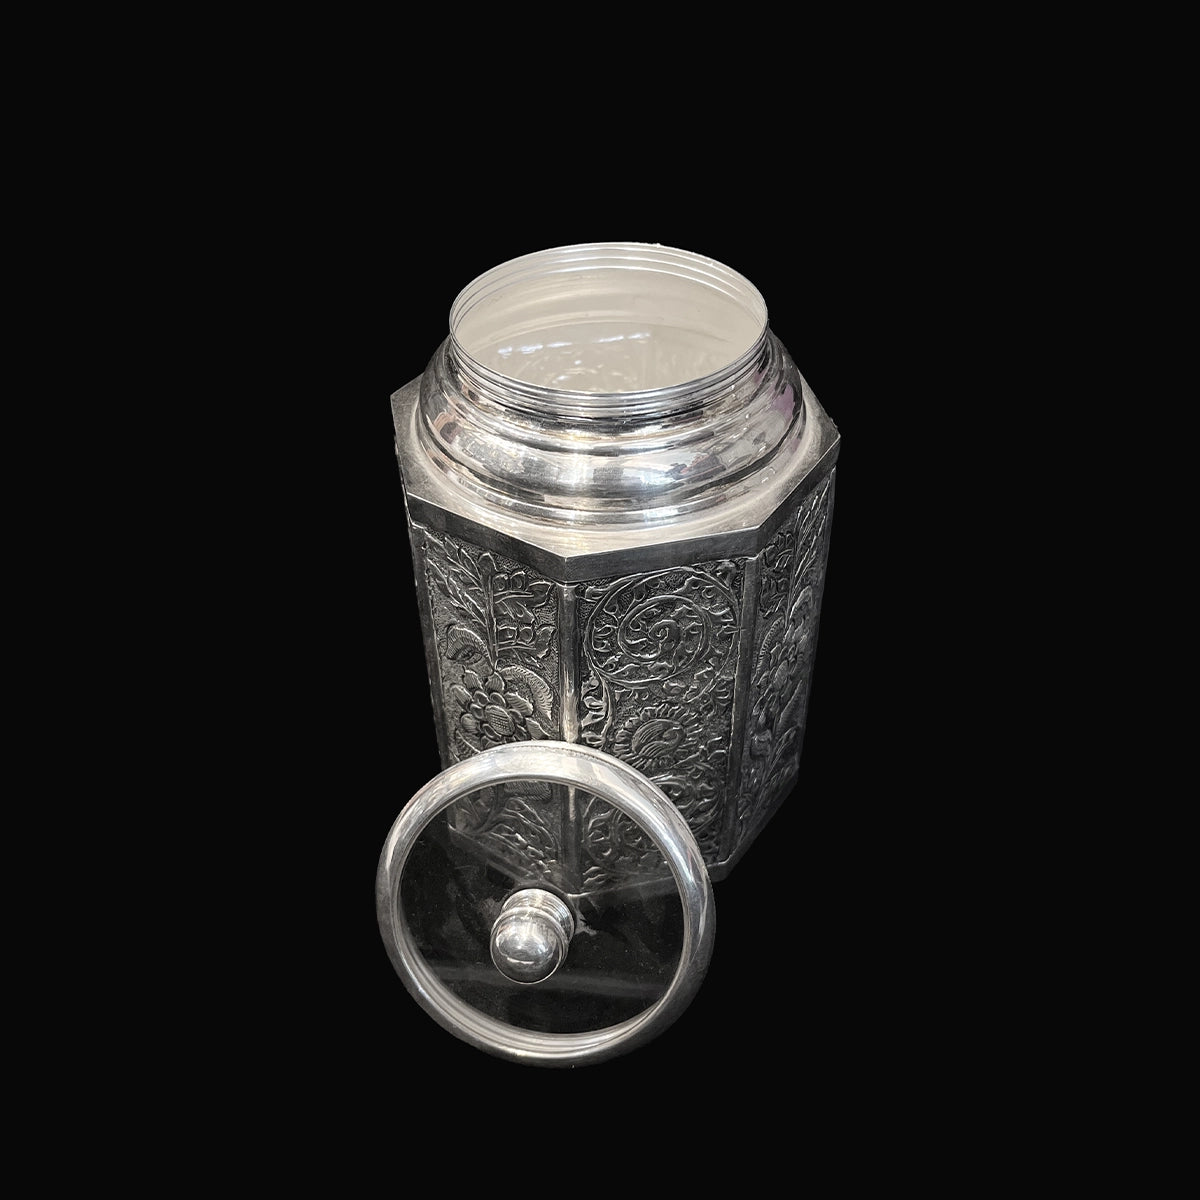 Pure Silver Gifts Online, Buy Silver Items for Gift, 92.5 Silver Return  Gifts